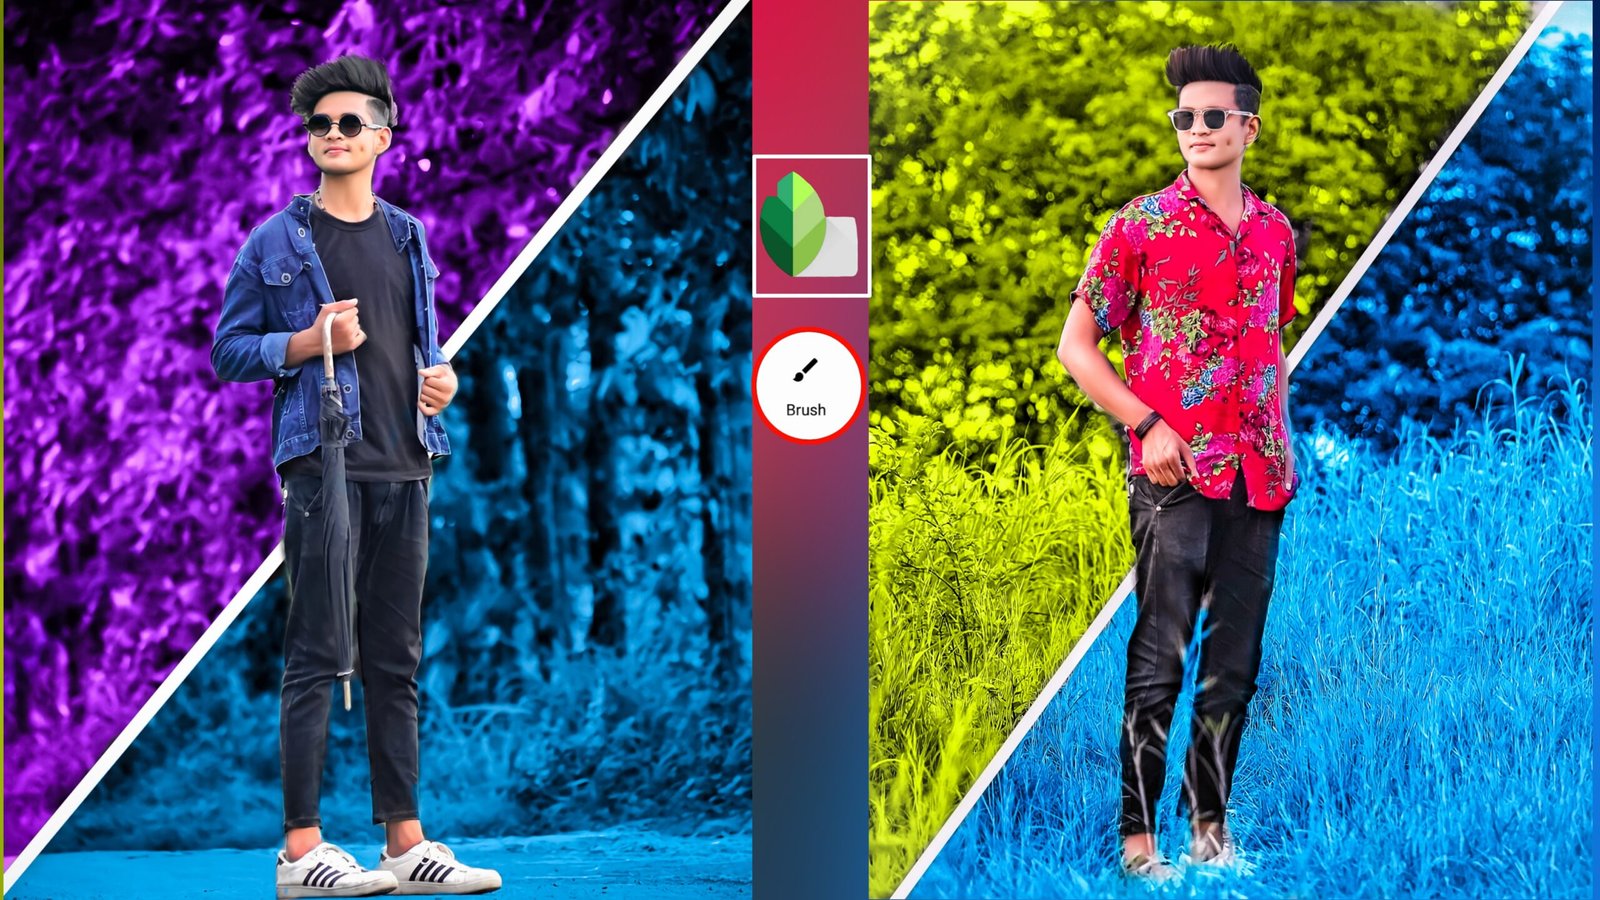 Snapseed Creative Photo Editing || Background Color change photo editing